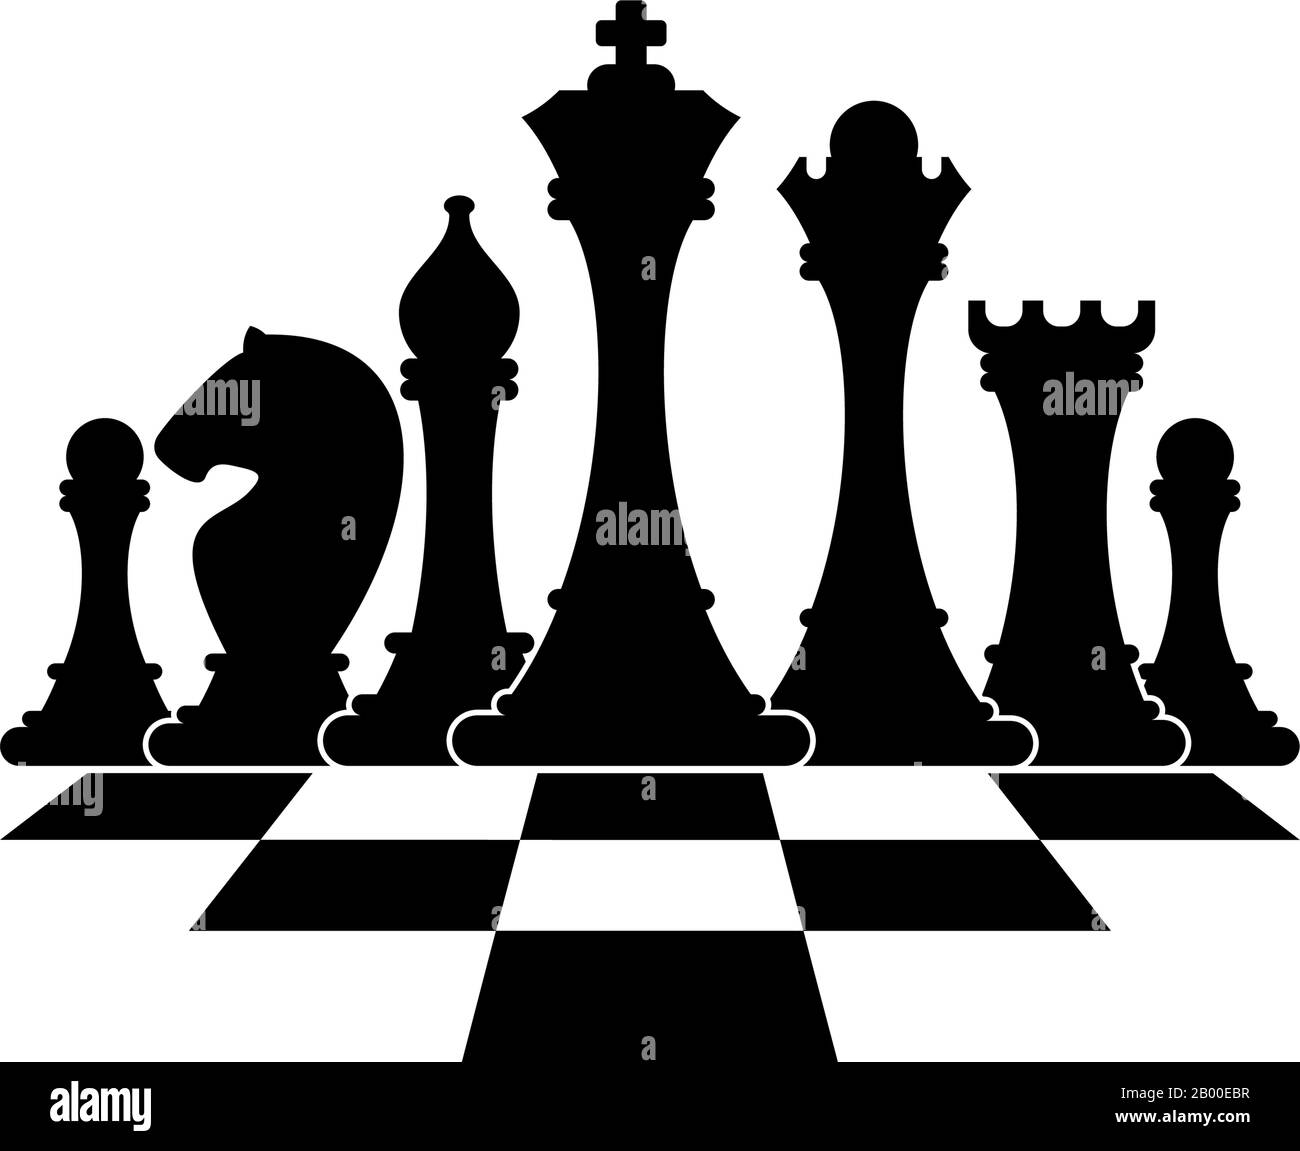 Set Of Figures For Chess Strategy Board Game Stock Vector Image Art Alamy,Cat Breeds